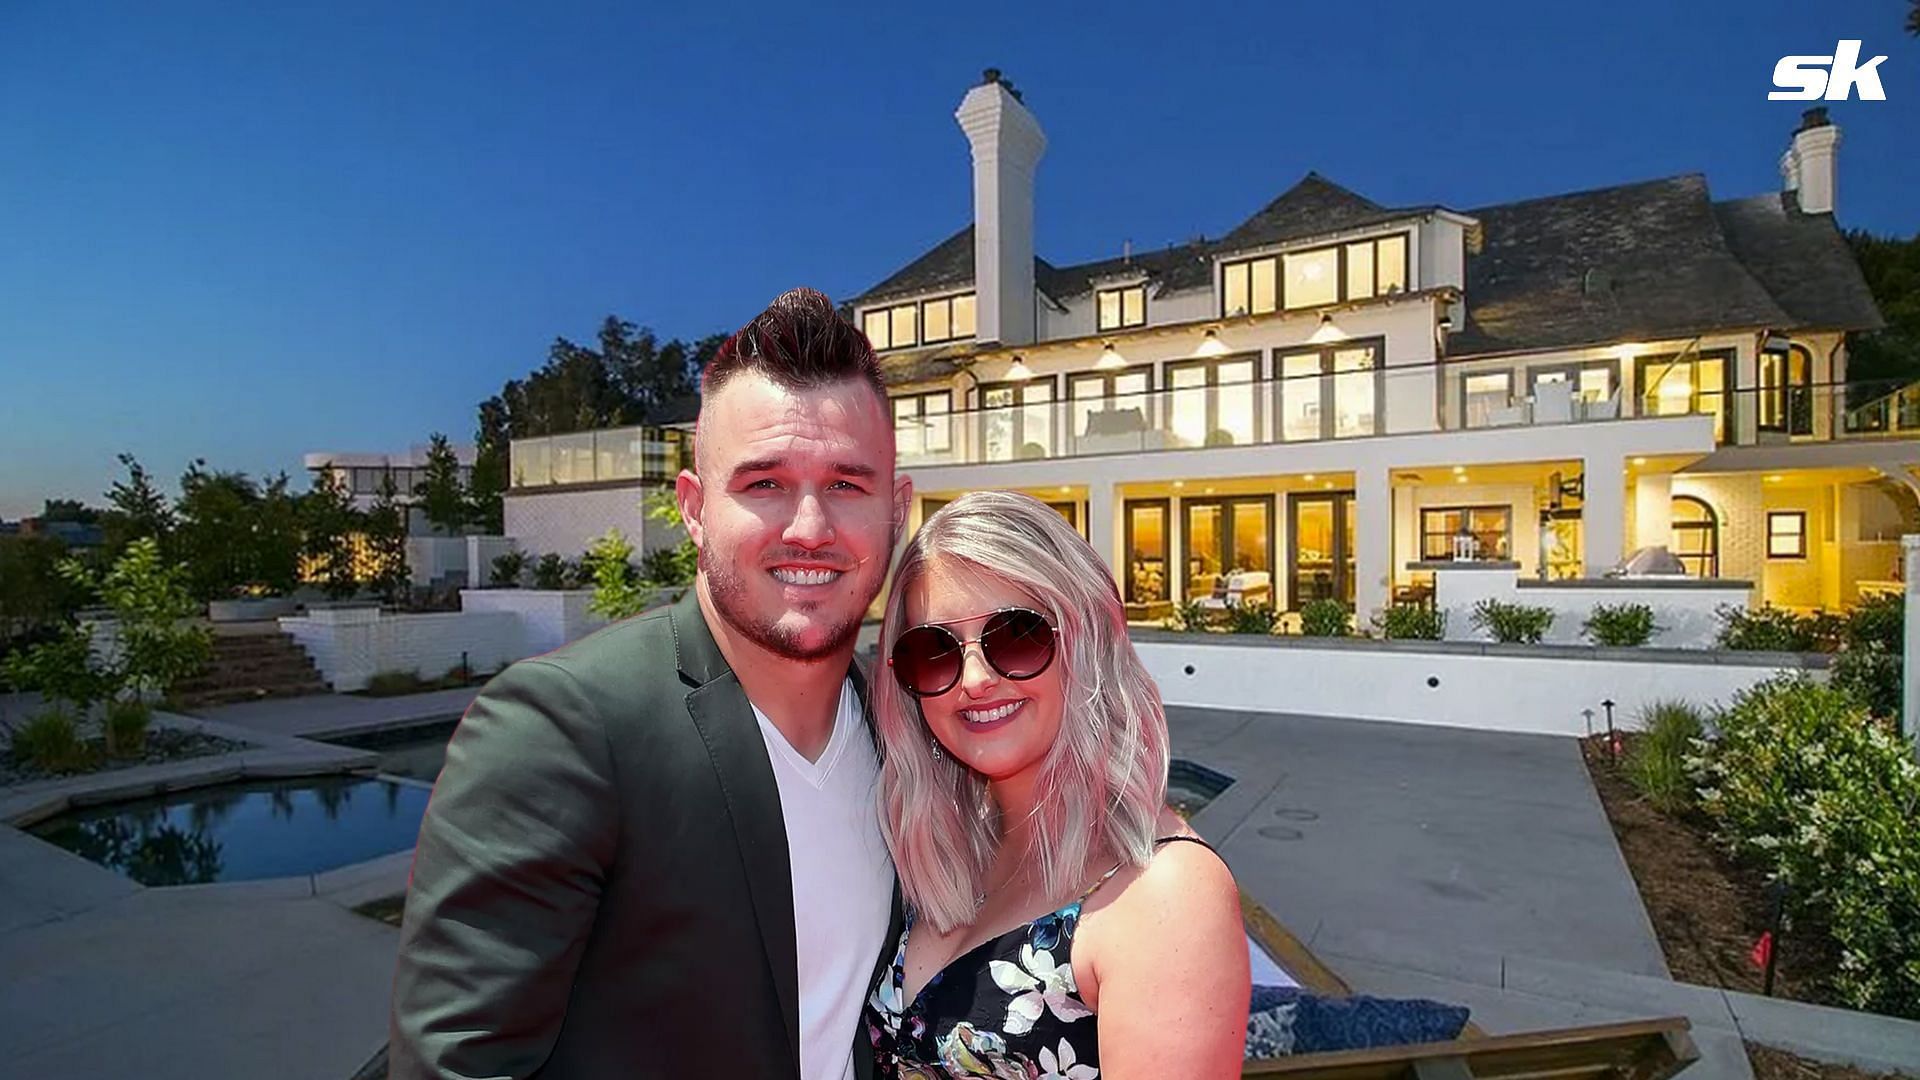 Mike Trout owns a lavish mansion in California.